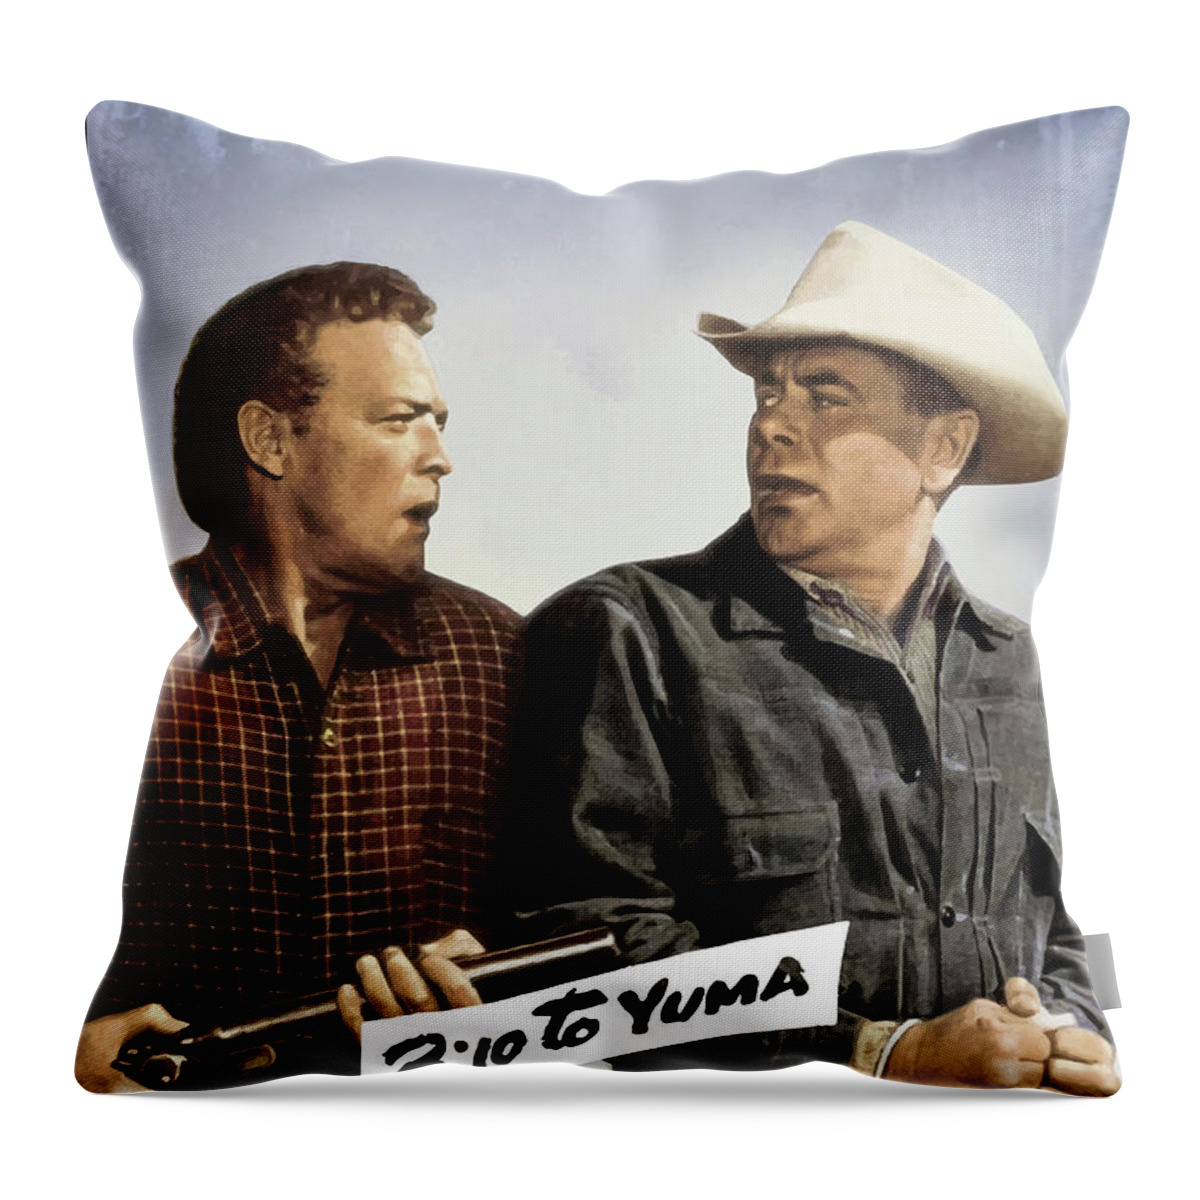 Movie Poster Throw Pillow featuring the digital art 3 10 To Yuma by Bo Kev